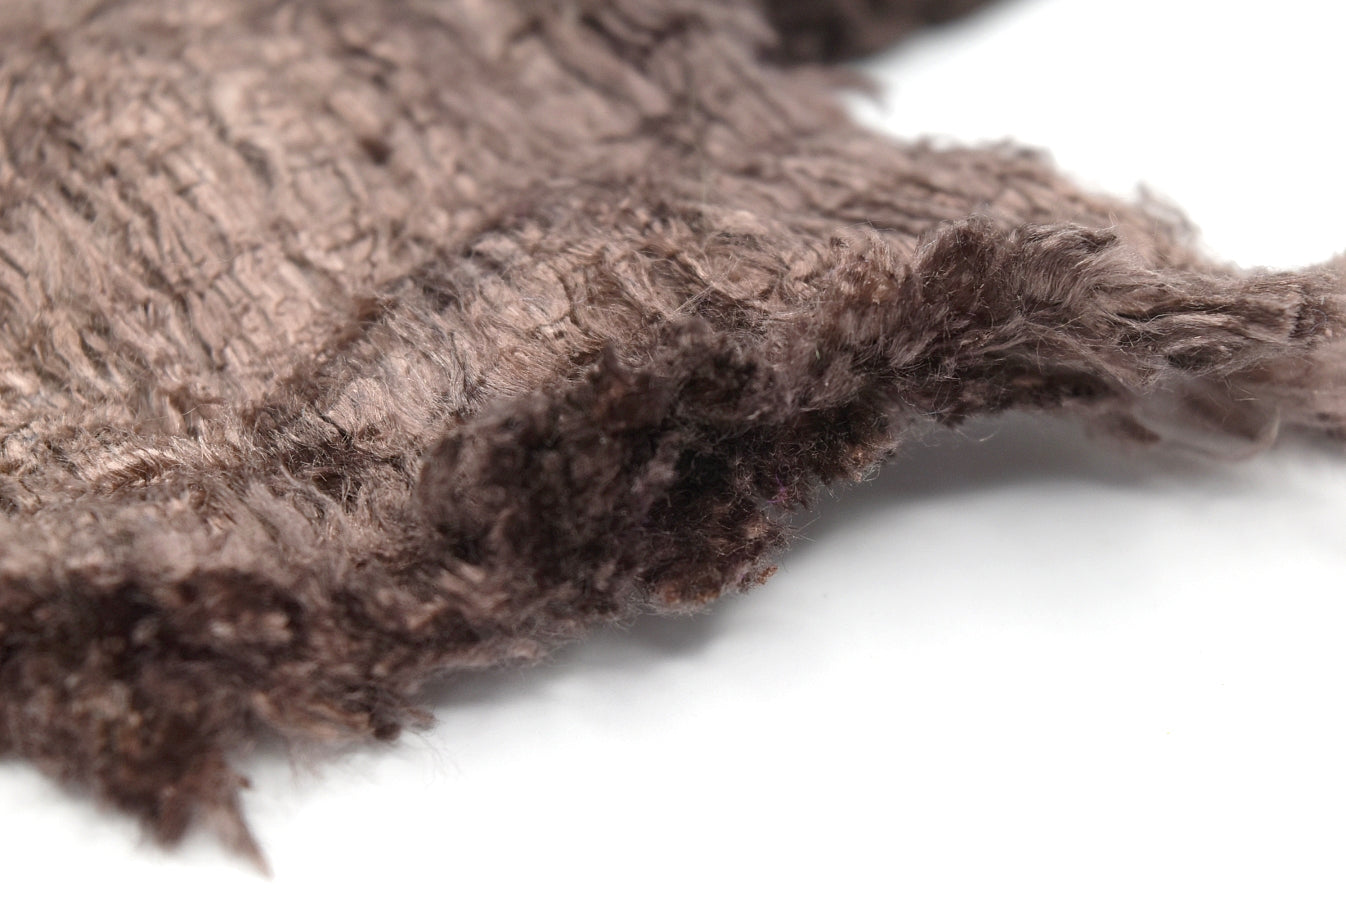 Mulberry Silk Cocoon Sheet Fabric Hand Dyed Brown 12676| Silk Cocoon Sheets | Sally Ridgway | Shop Wool, Felt and Fibre Online